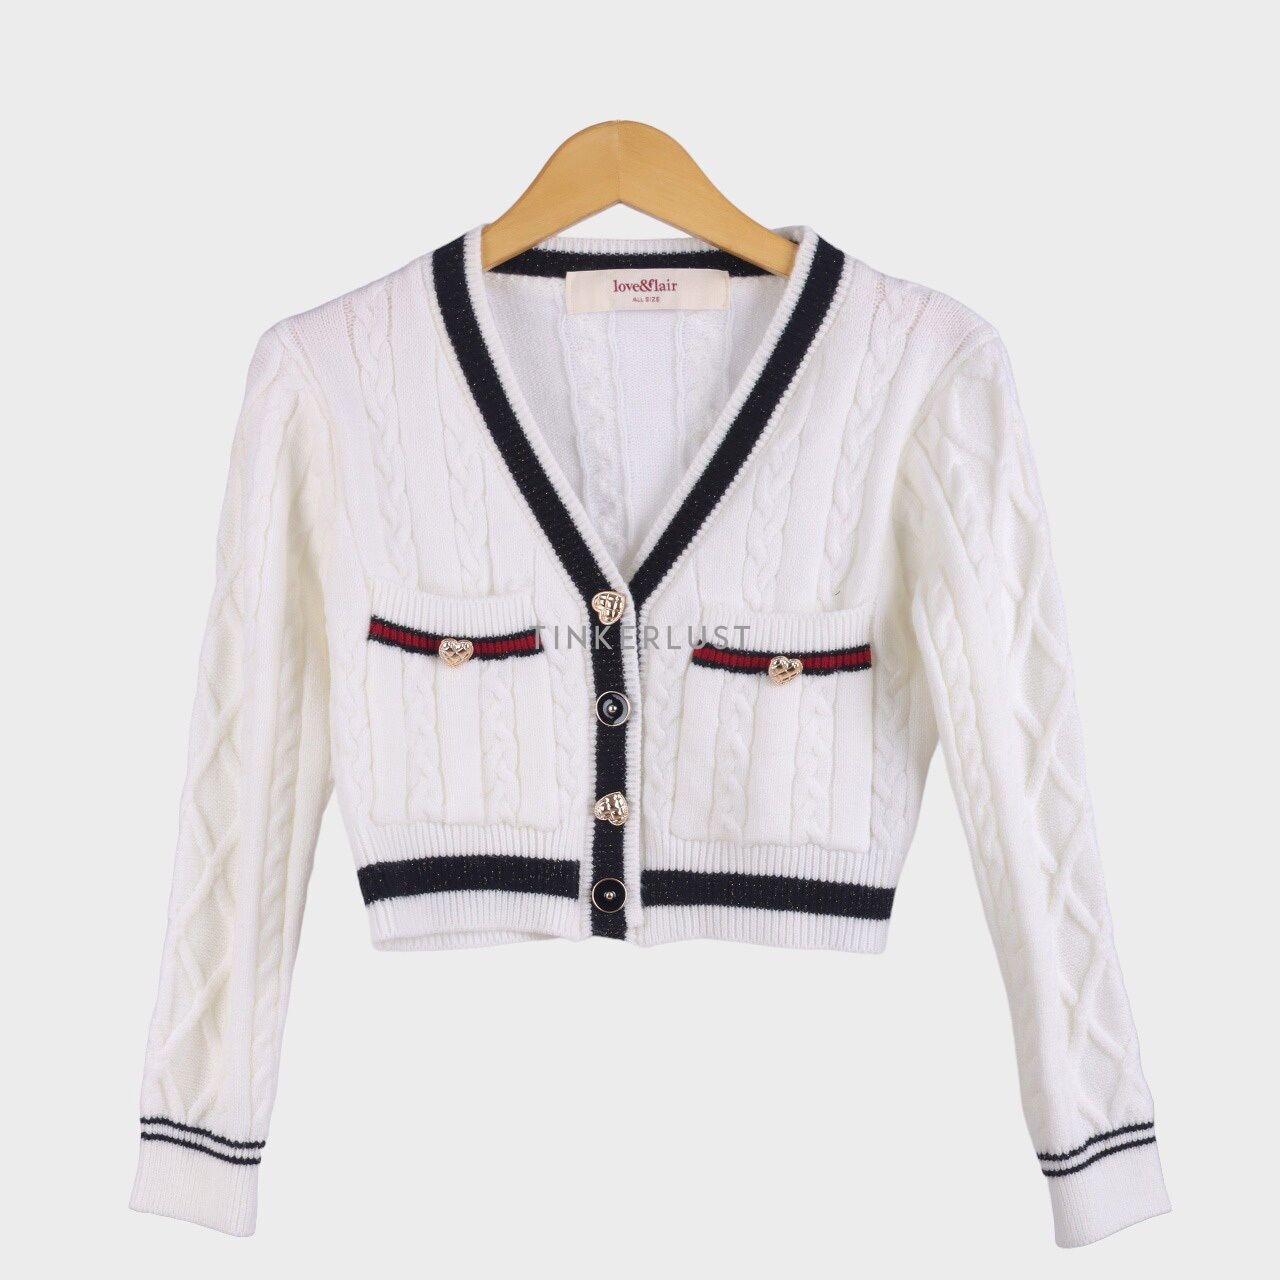 love-and-flair Black & White Cardigan